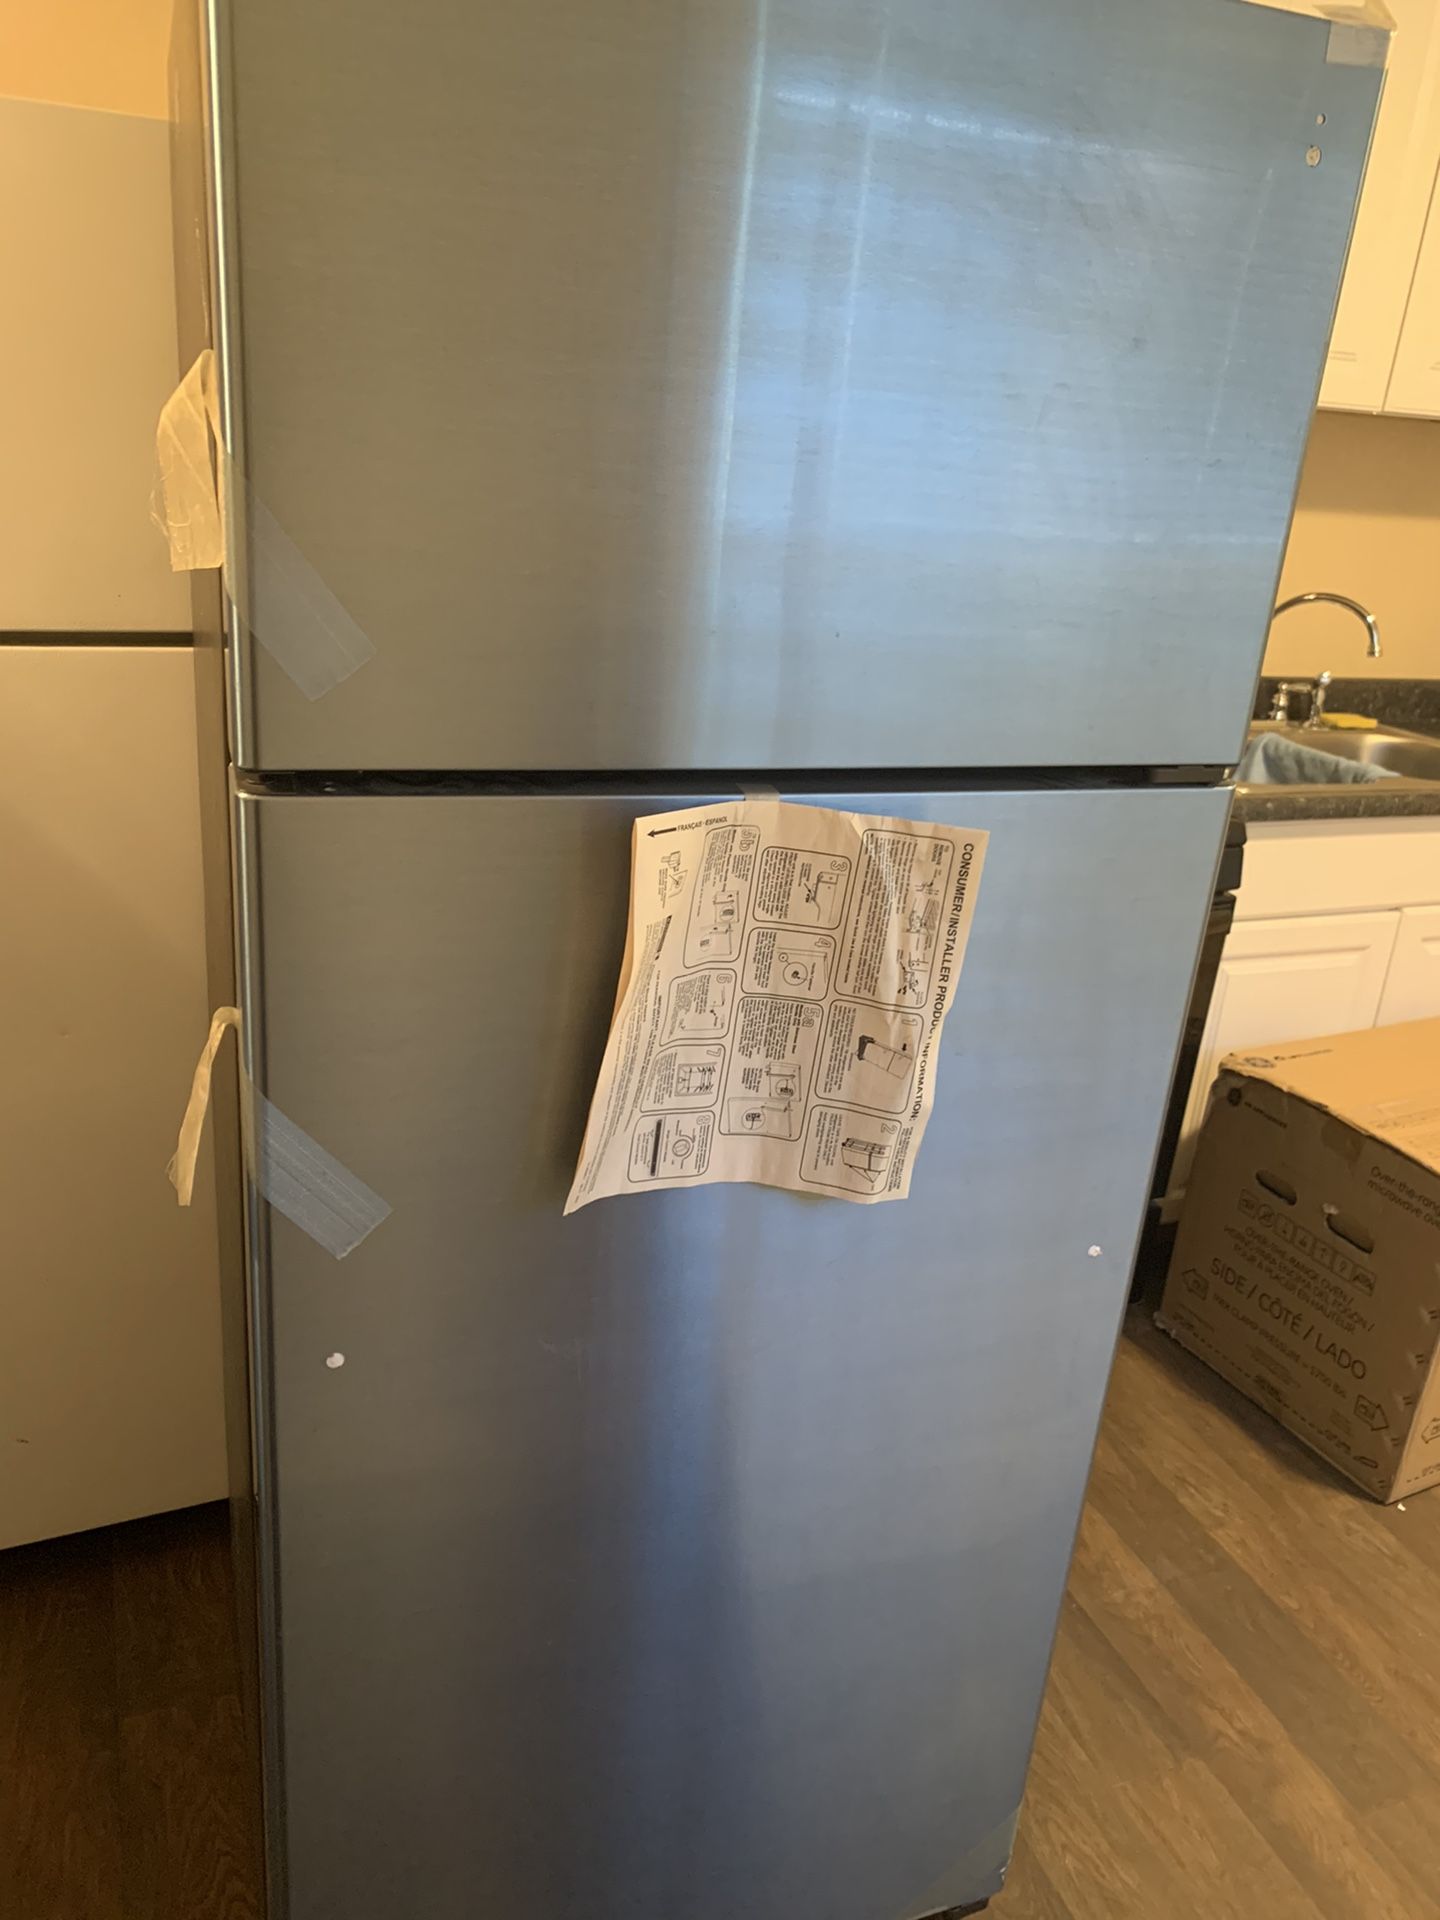 New GE top freezer refrigerator in stainless steel